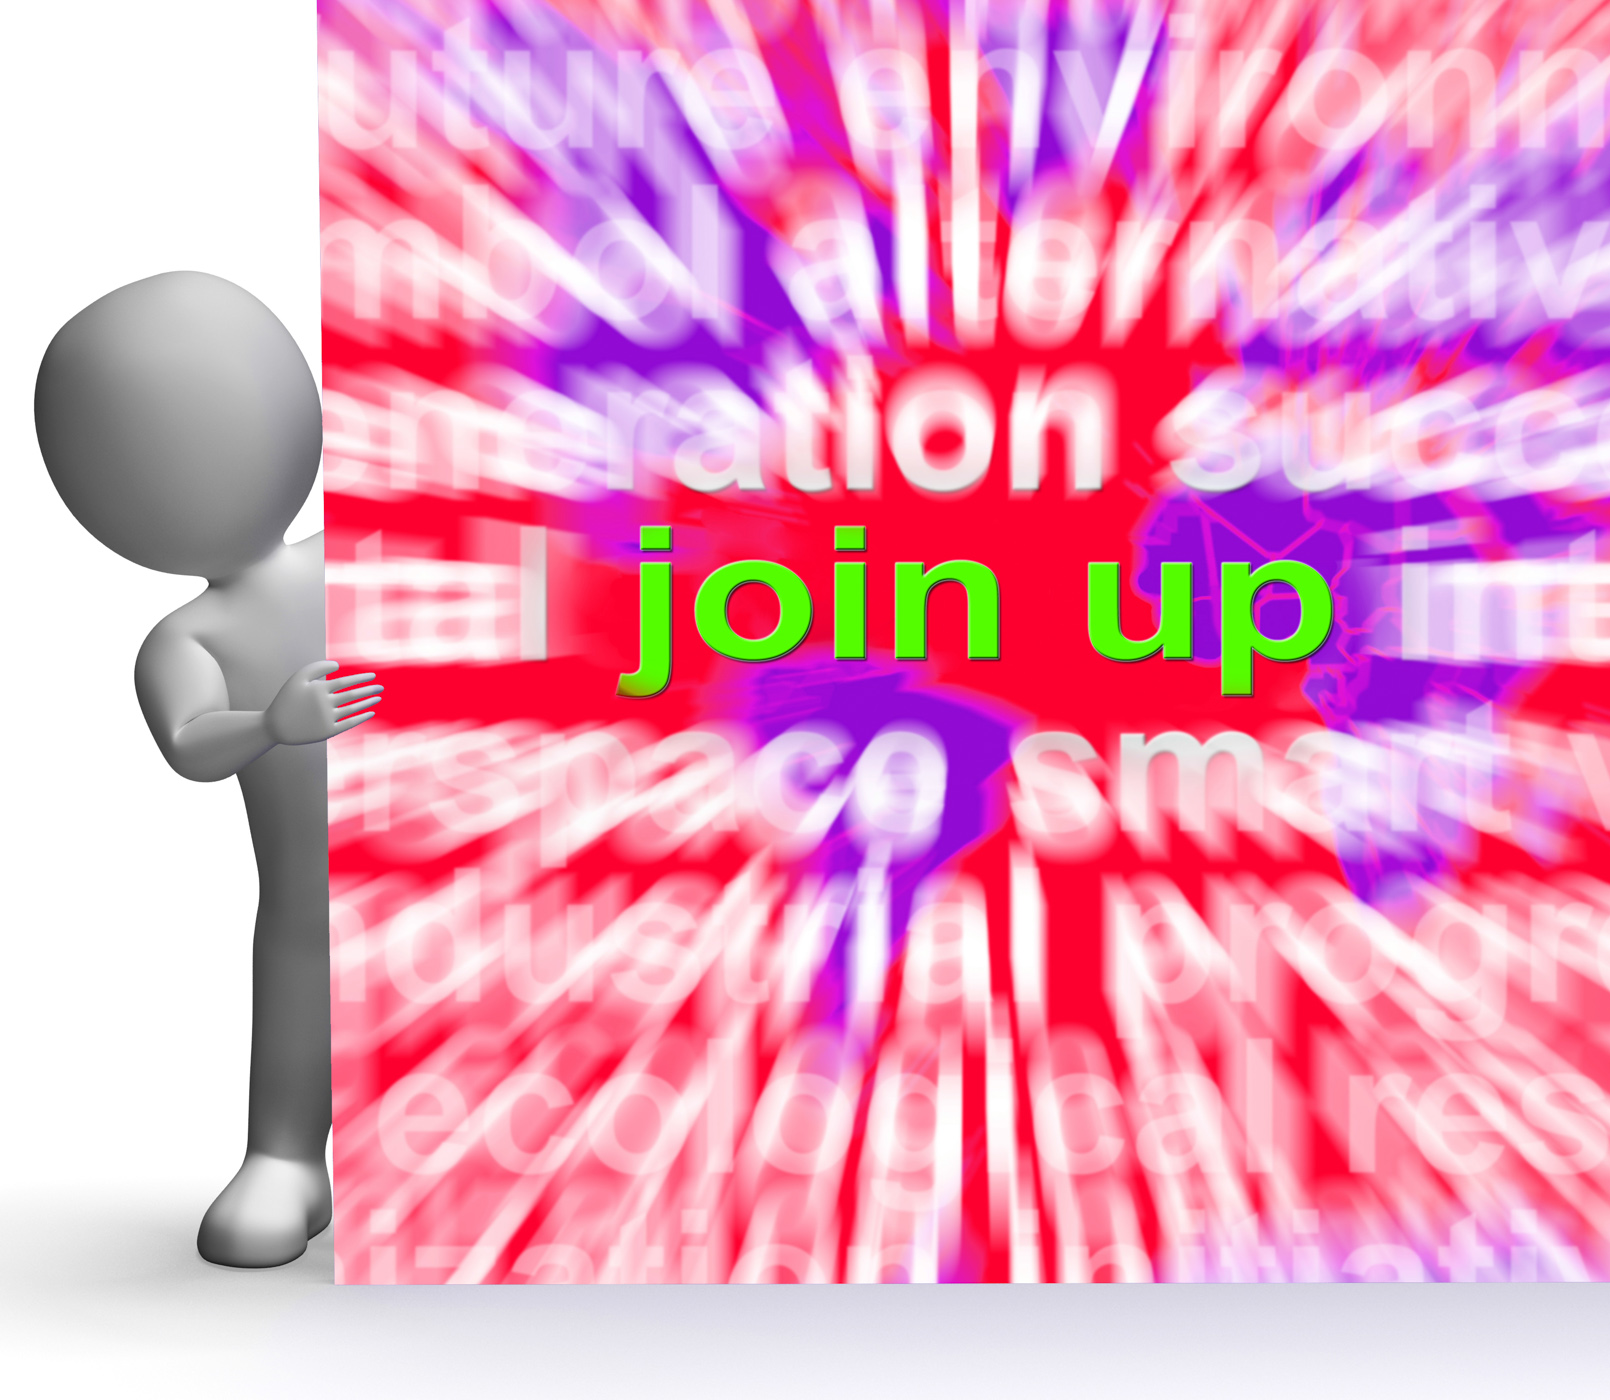 Join up word cloud sign shows joining membership register photo